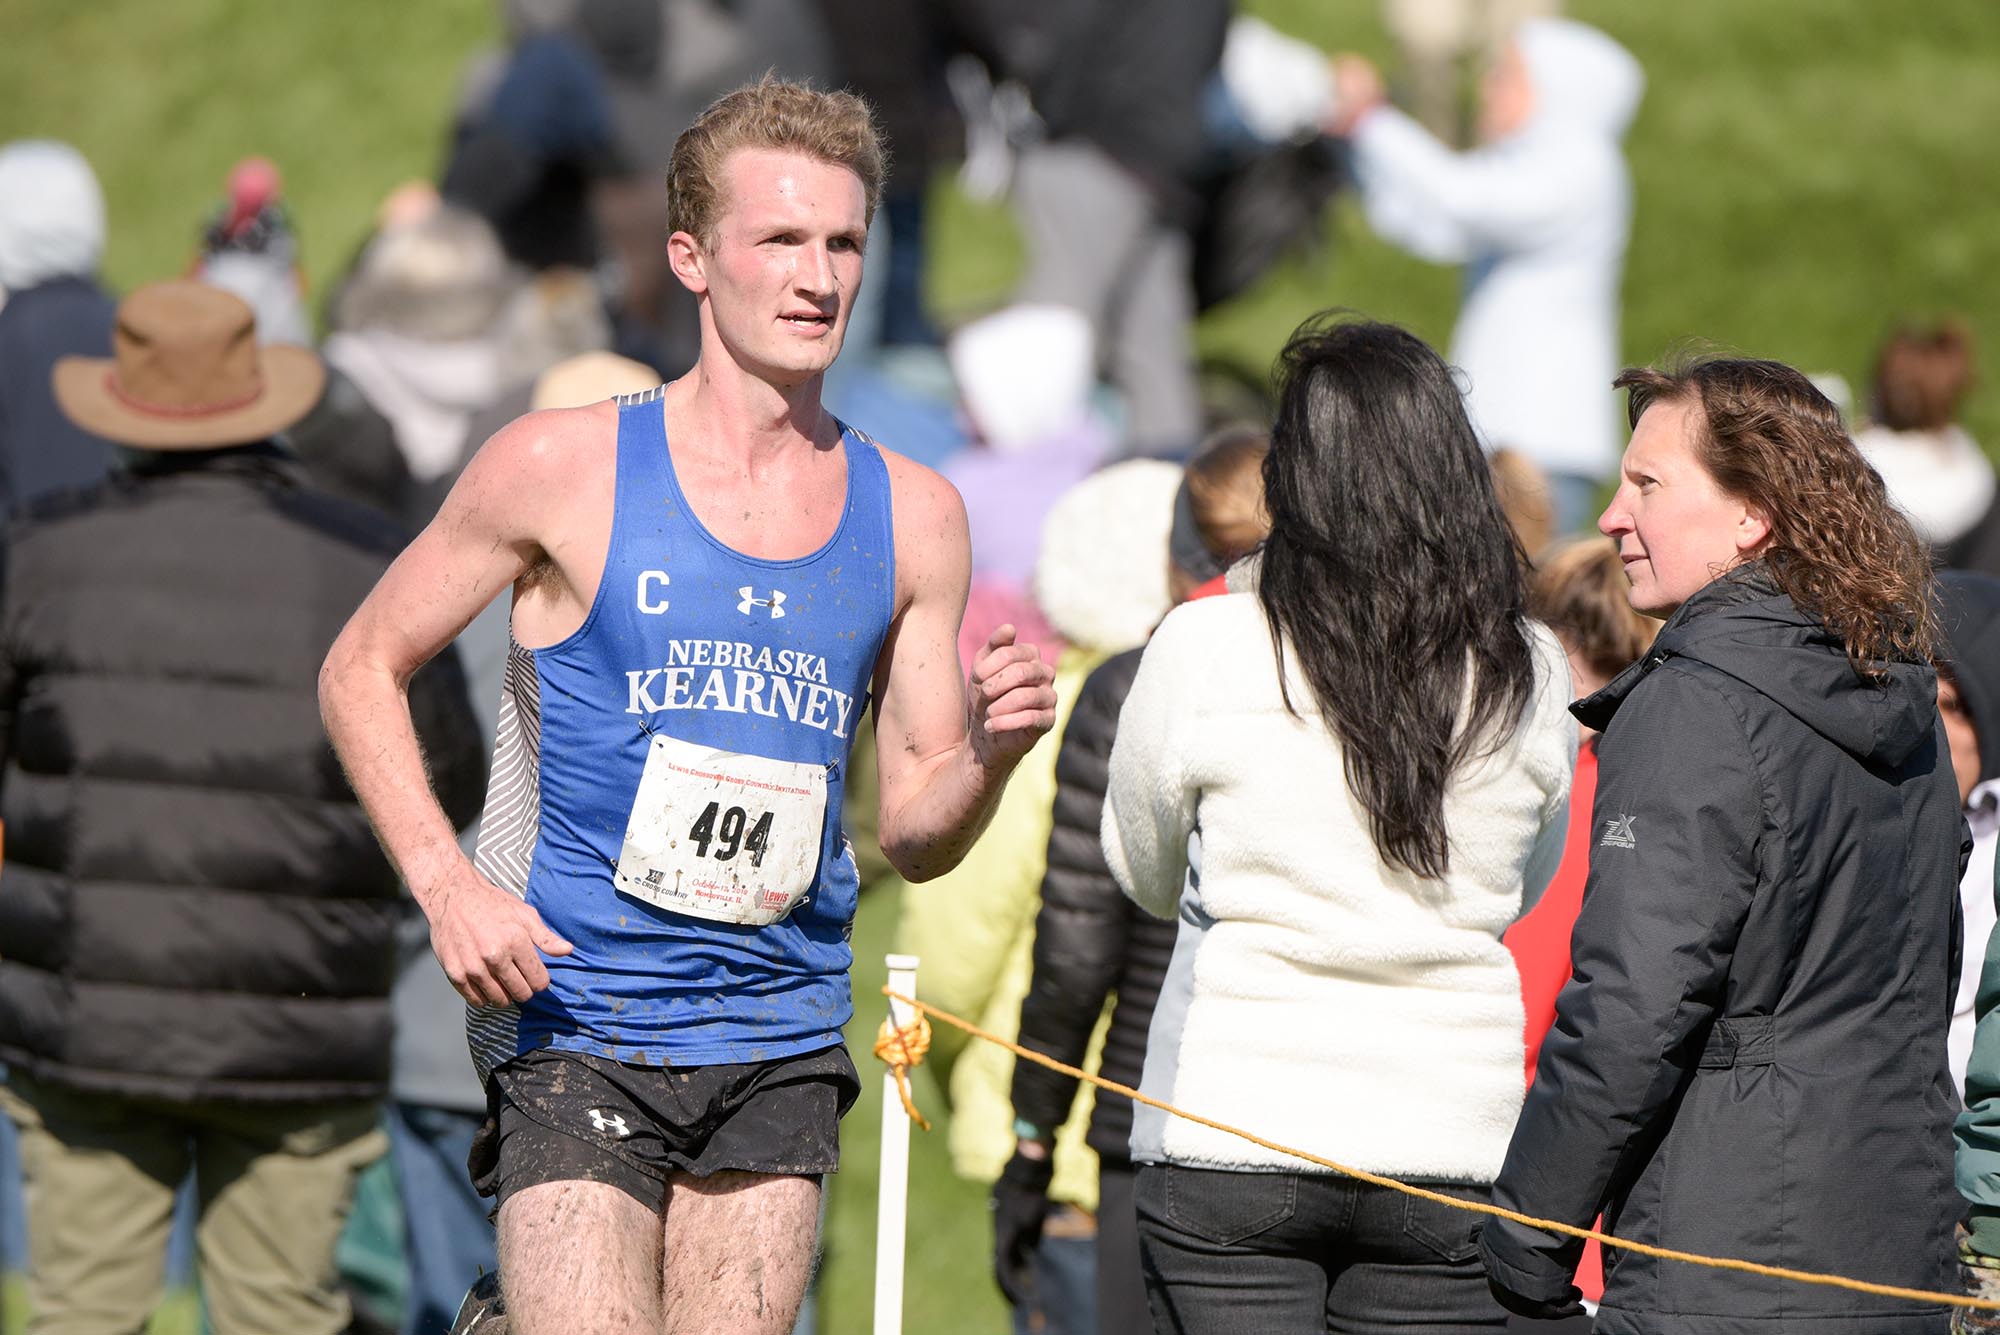 Although he's battled injuries the past two years, UNK senior Corbin Hansen never lets his teammates down. "No matter the race, they know I'm going to give it my all," he said. (Courtesy of Steve Woltmann Photography)